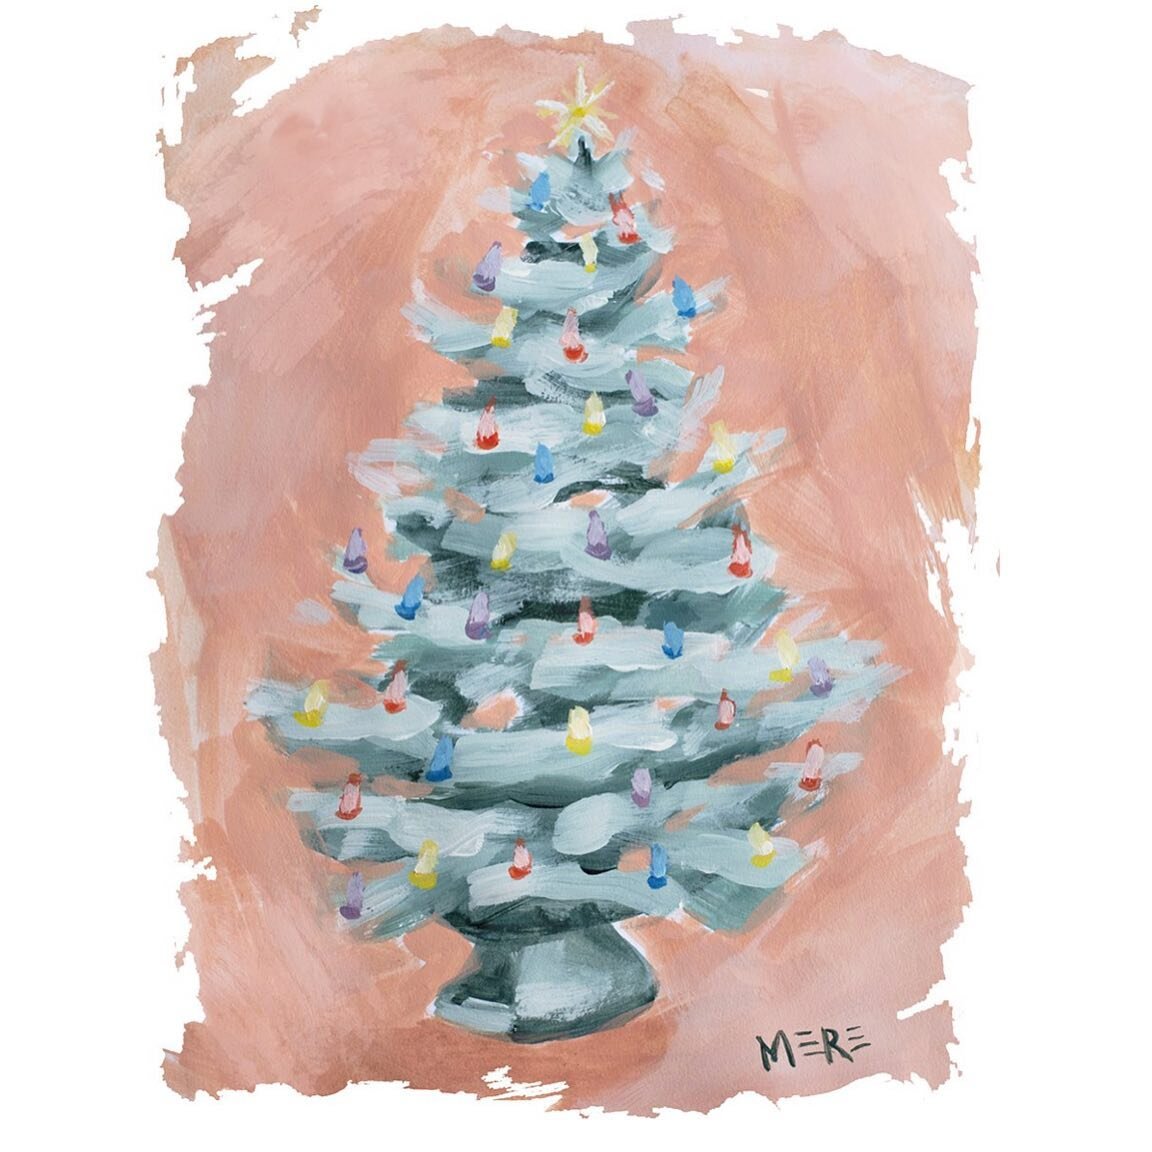 Now live on the website, our second annual Christmas Tree print and it&rsquo;s inspired by mom's vintage ceramic tree.

These are very limited, so click the link below if you'd like one for you or for a friend too!

Prints measure 5x7, perfect for a 